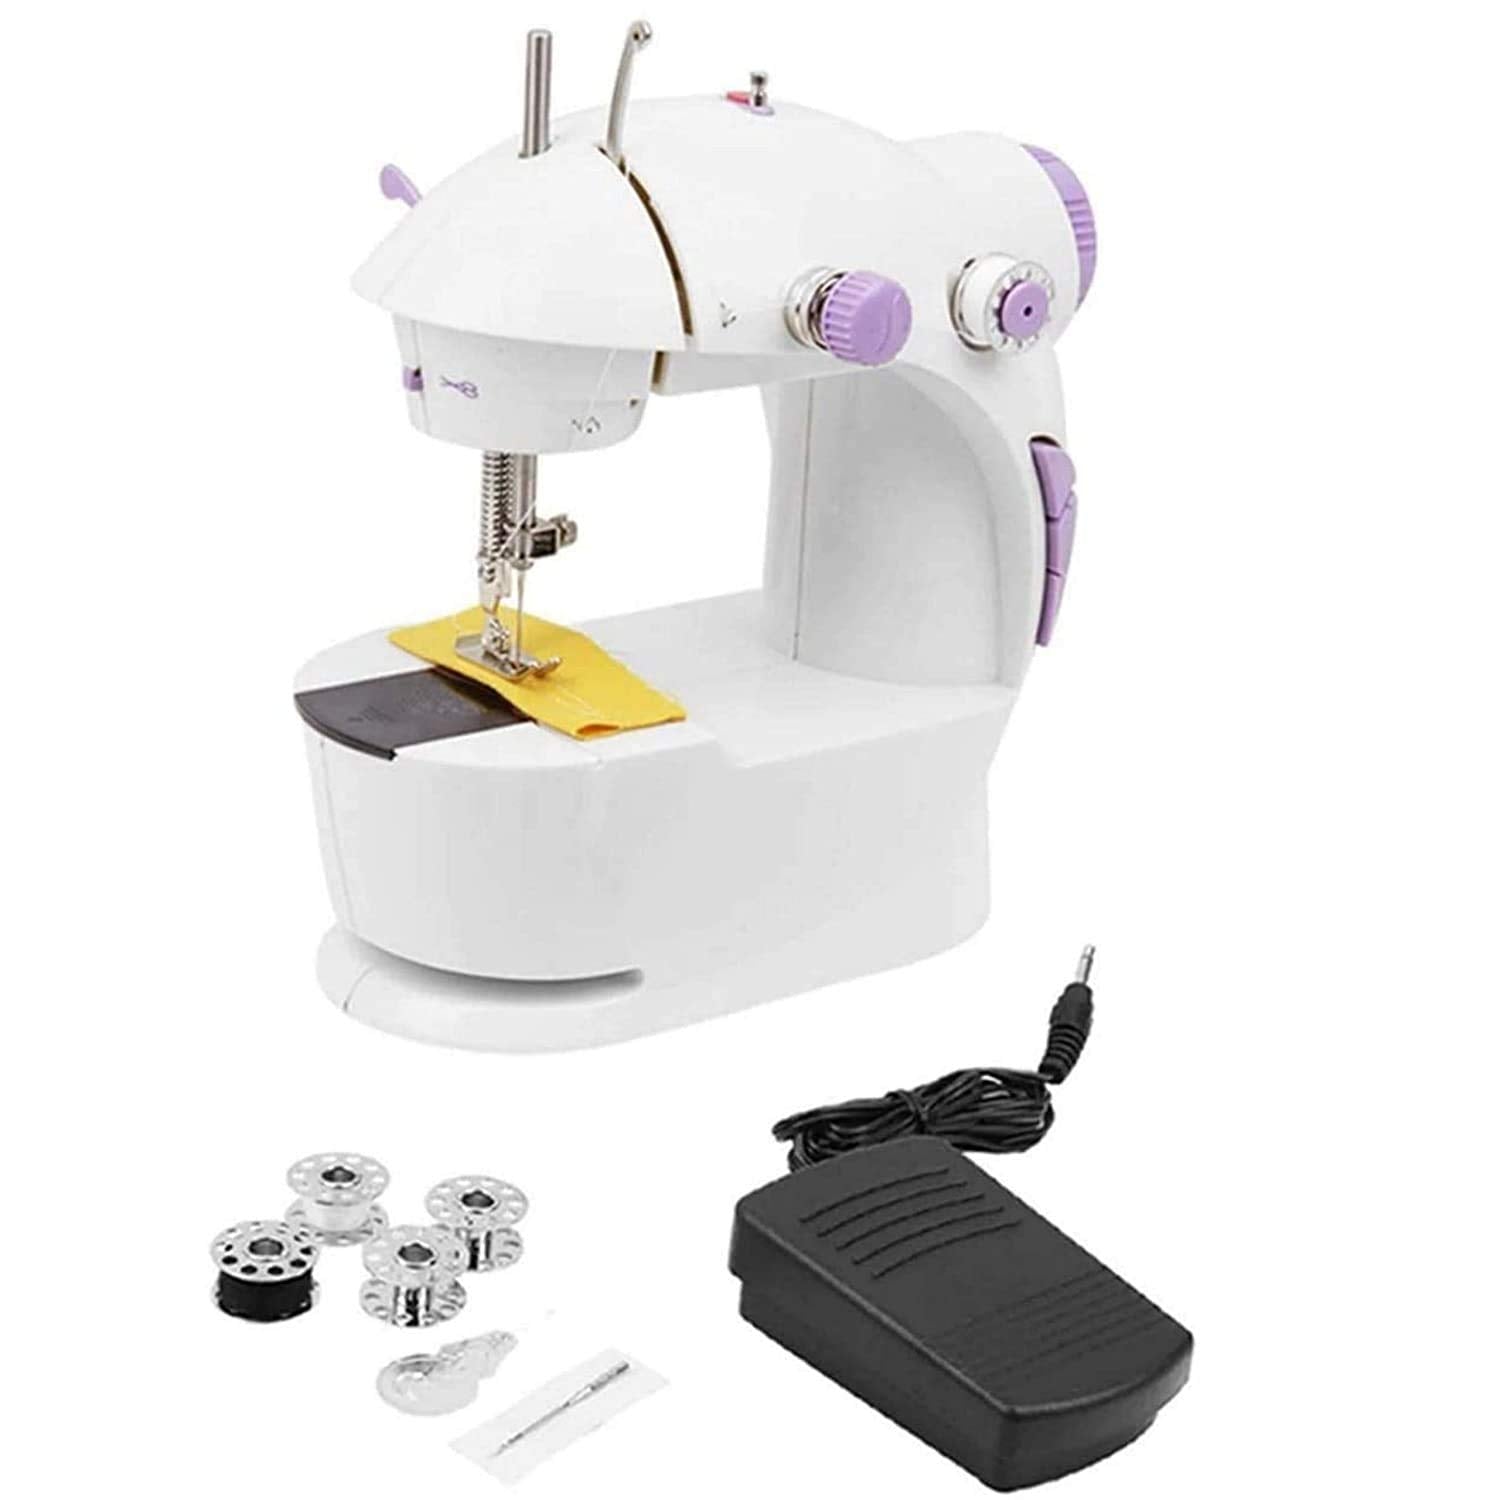 JD9 Mini Portable Sewing Machine 4 in 1 for Home Tailoring, Sewing Machines, Mini Sewing Machine for Home, Sewing Machine Mini, Hand Machine for Stitching, Hand Sewing Machines,White & Purple